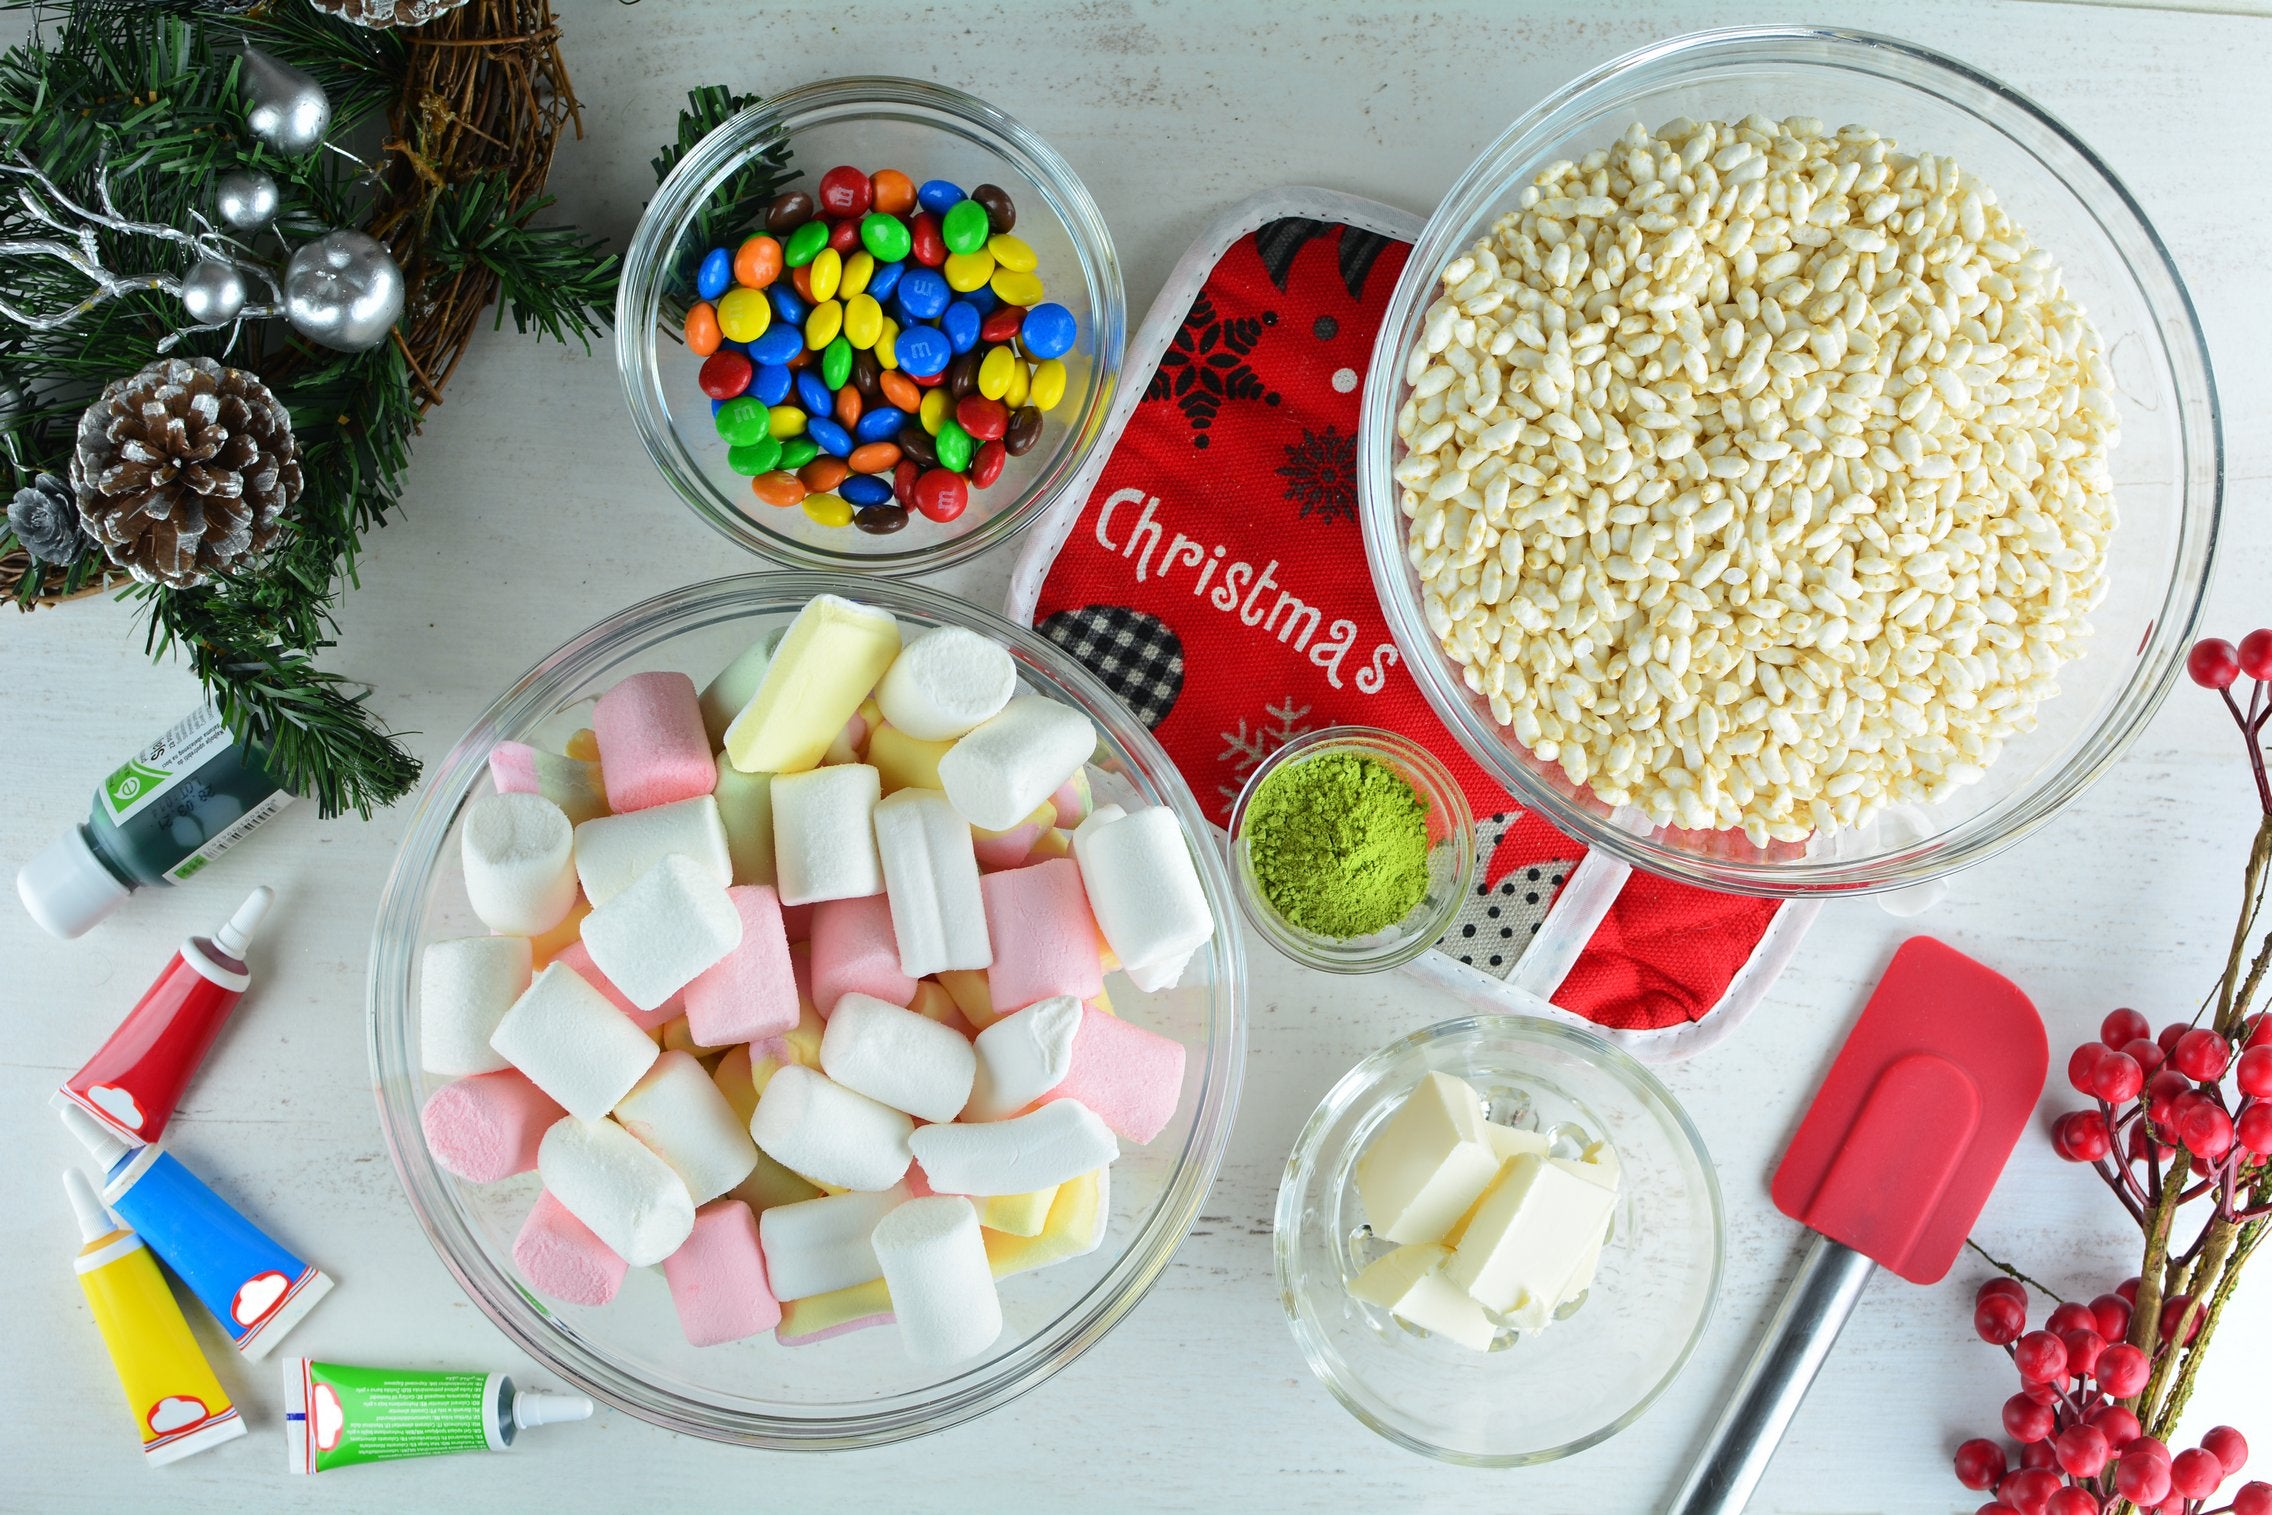 marshmallow-matcha-grinch-cookies-with-m-m-s-ingredients